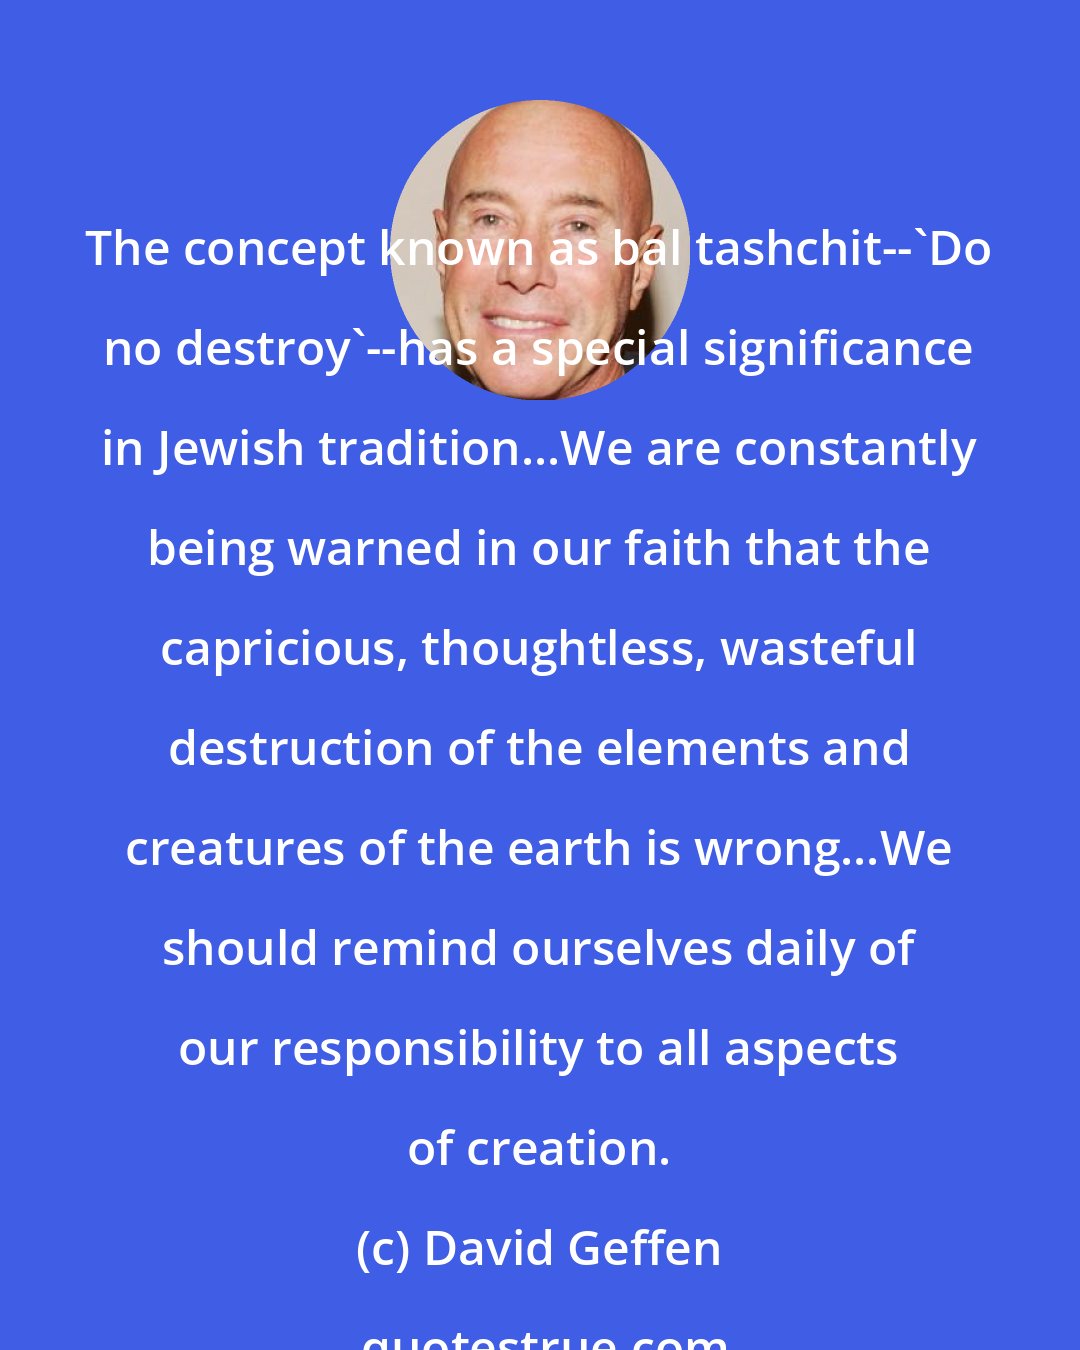 David Geffen: The concept known as bal tashchit--'Do no destroy'--has a special significance in Jewish tradition...We are constantly being warned in our faith that the capricious, thoughtless, wasteful destruction of the elements and creatures of the earth is wrong...We should remind ourselves daily of our responsibility to all aspects of creation.